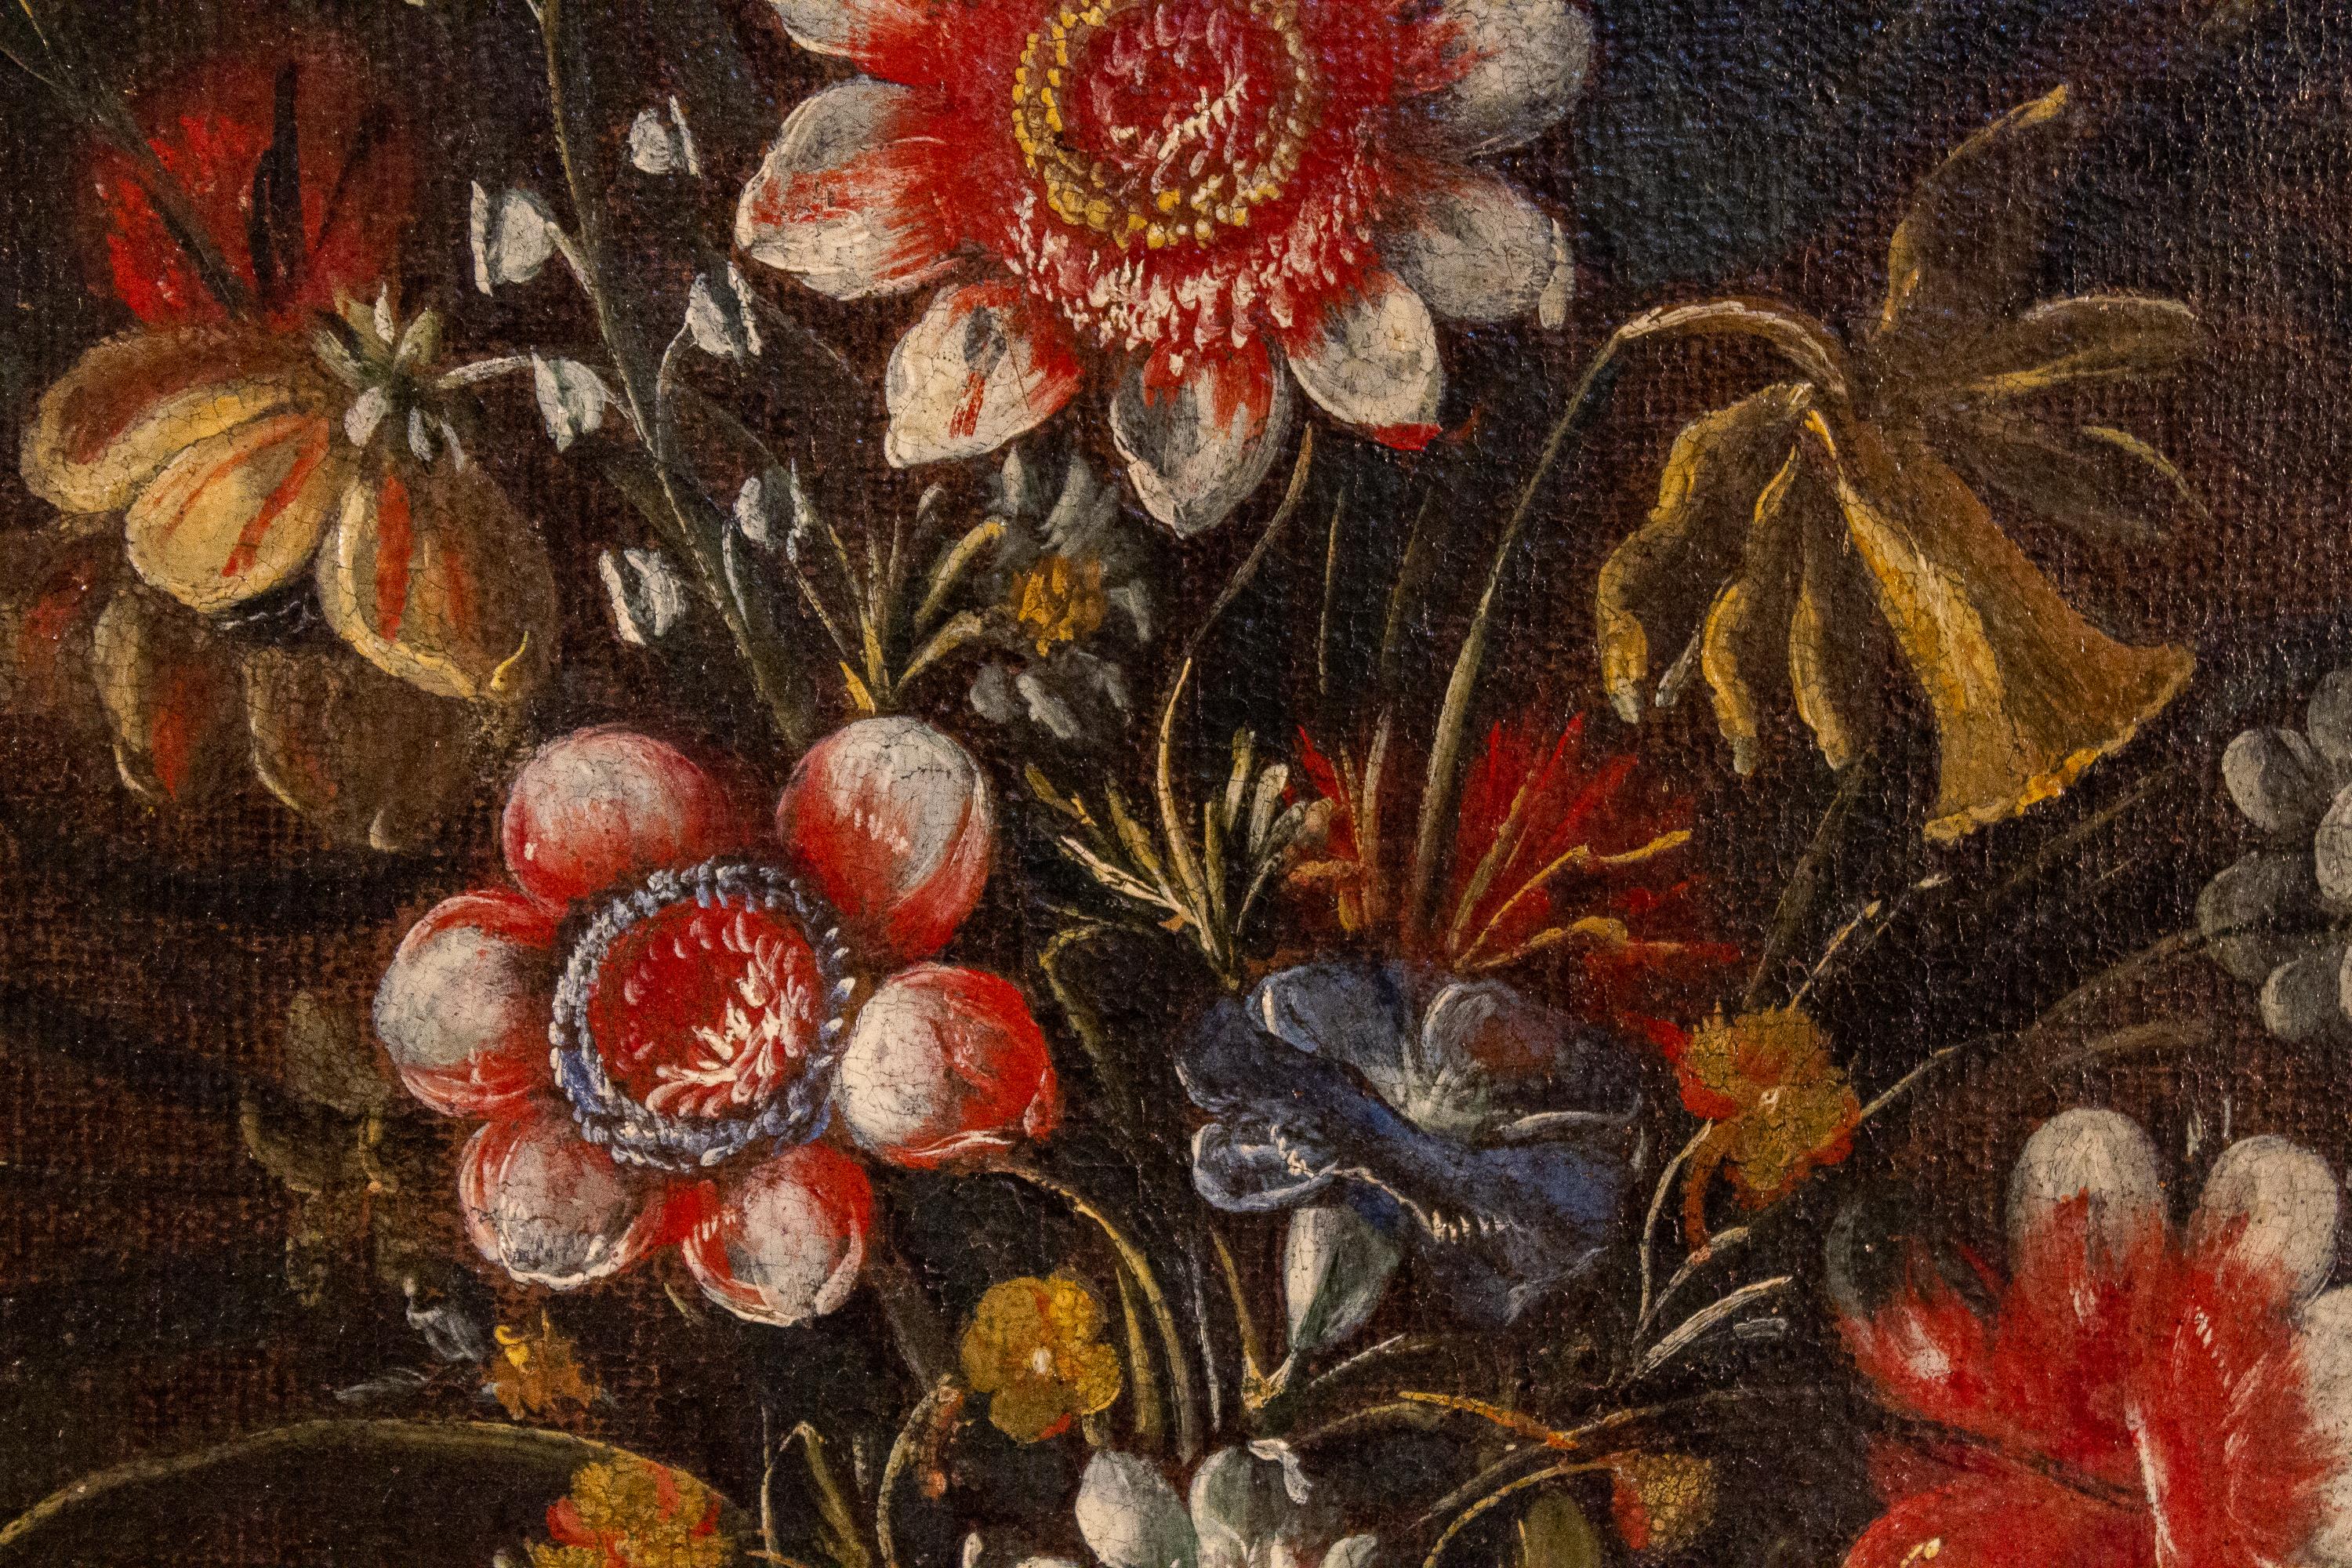 Pair of 18th century Italian Still Life Paintings of Flowers   For Sale 12